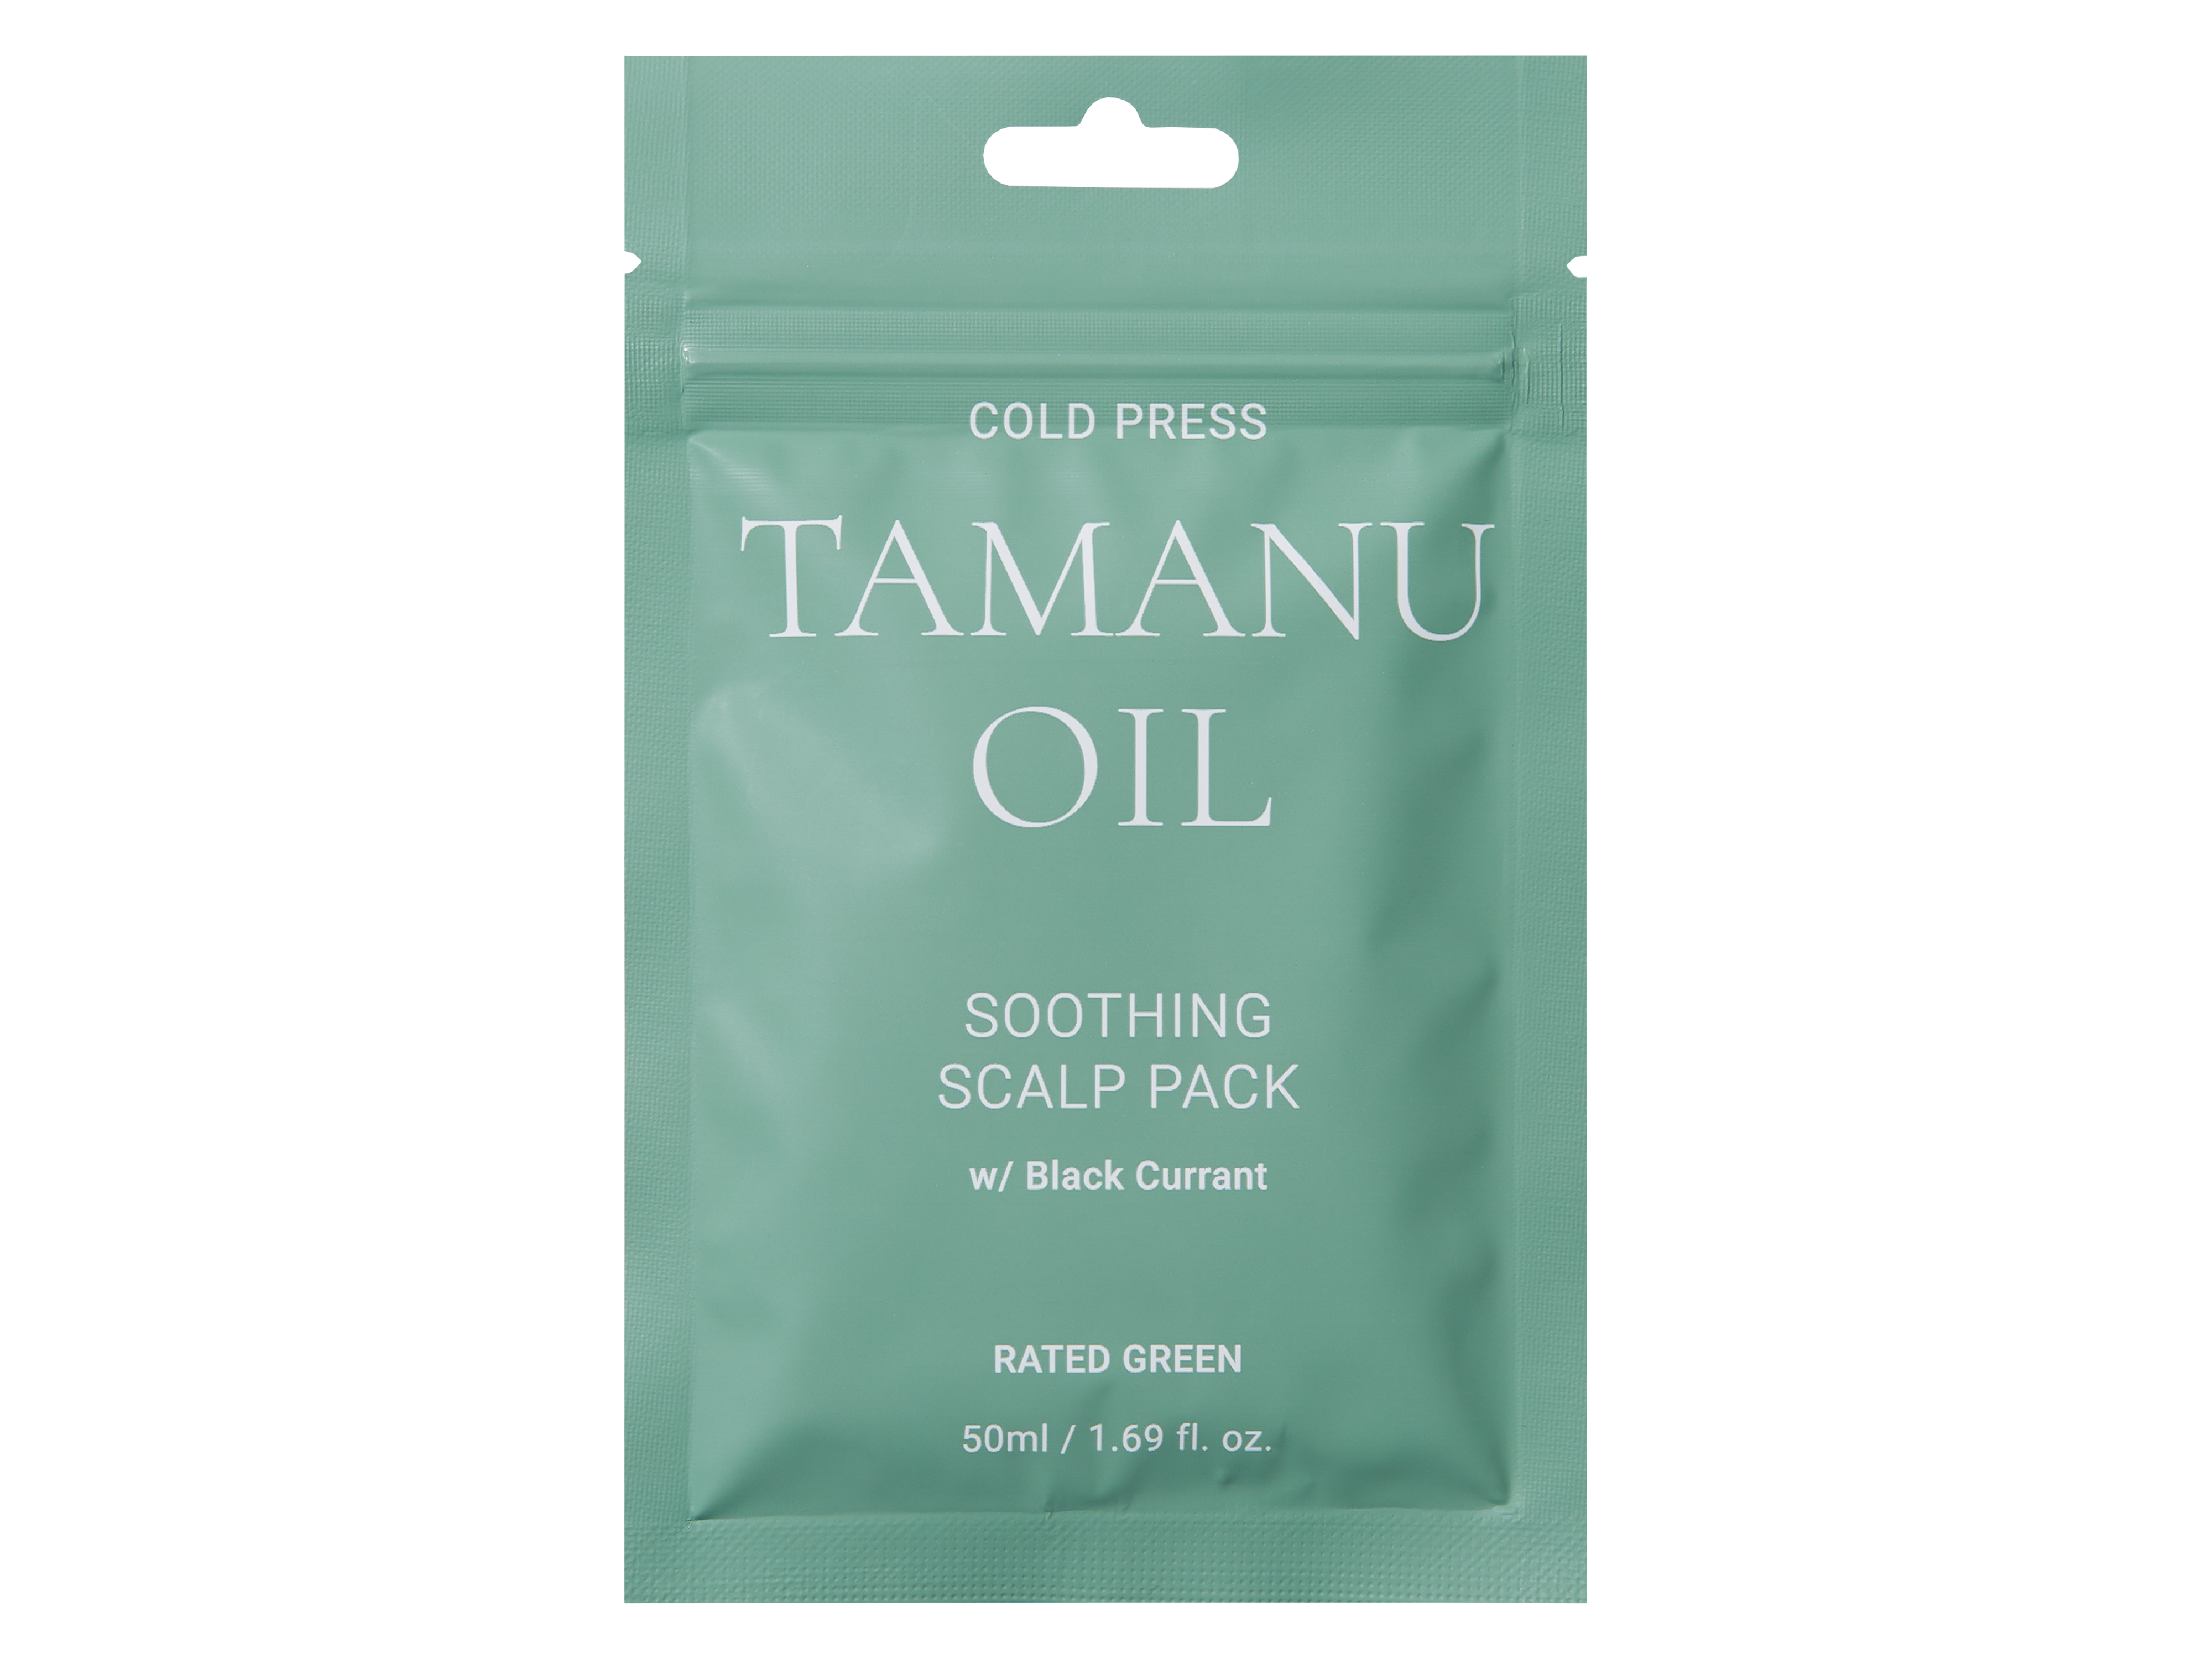 Rated Green Cold Press Tamanu Oil Soothing Scalp Pack, 50 ml